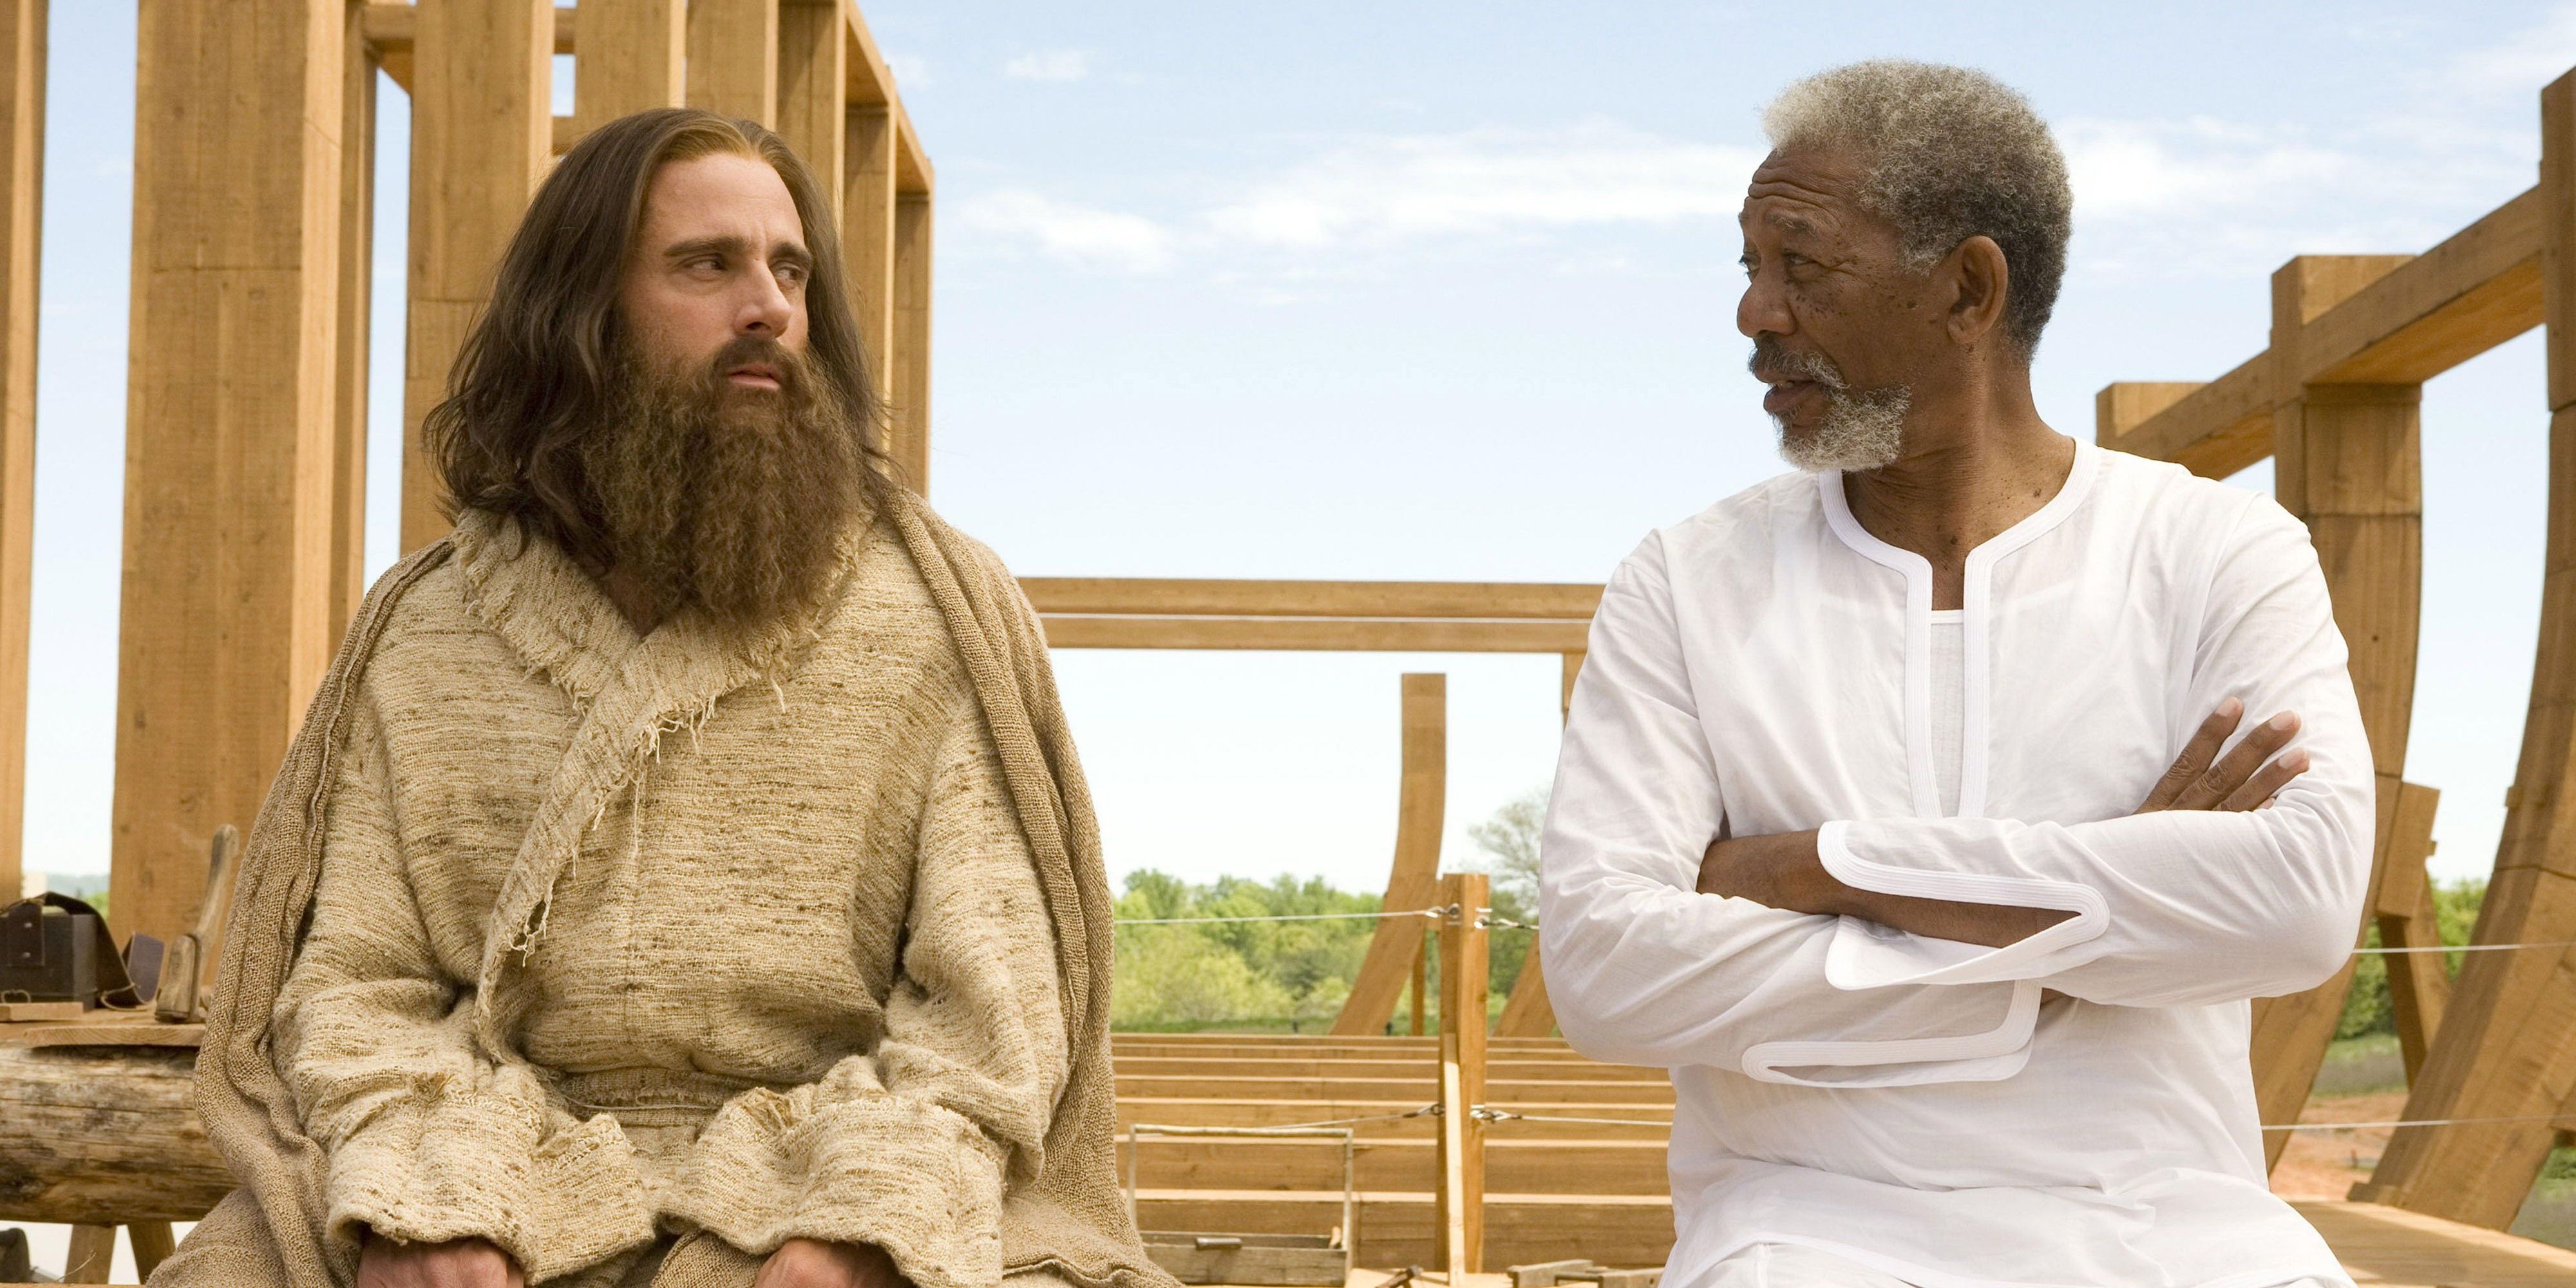 Evan and God sit on a half built ark in Evan Almighty